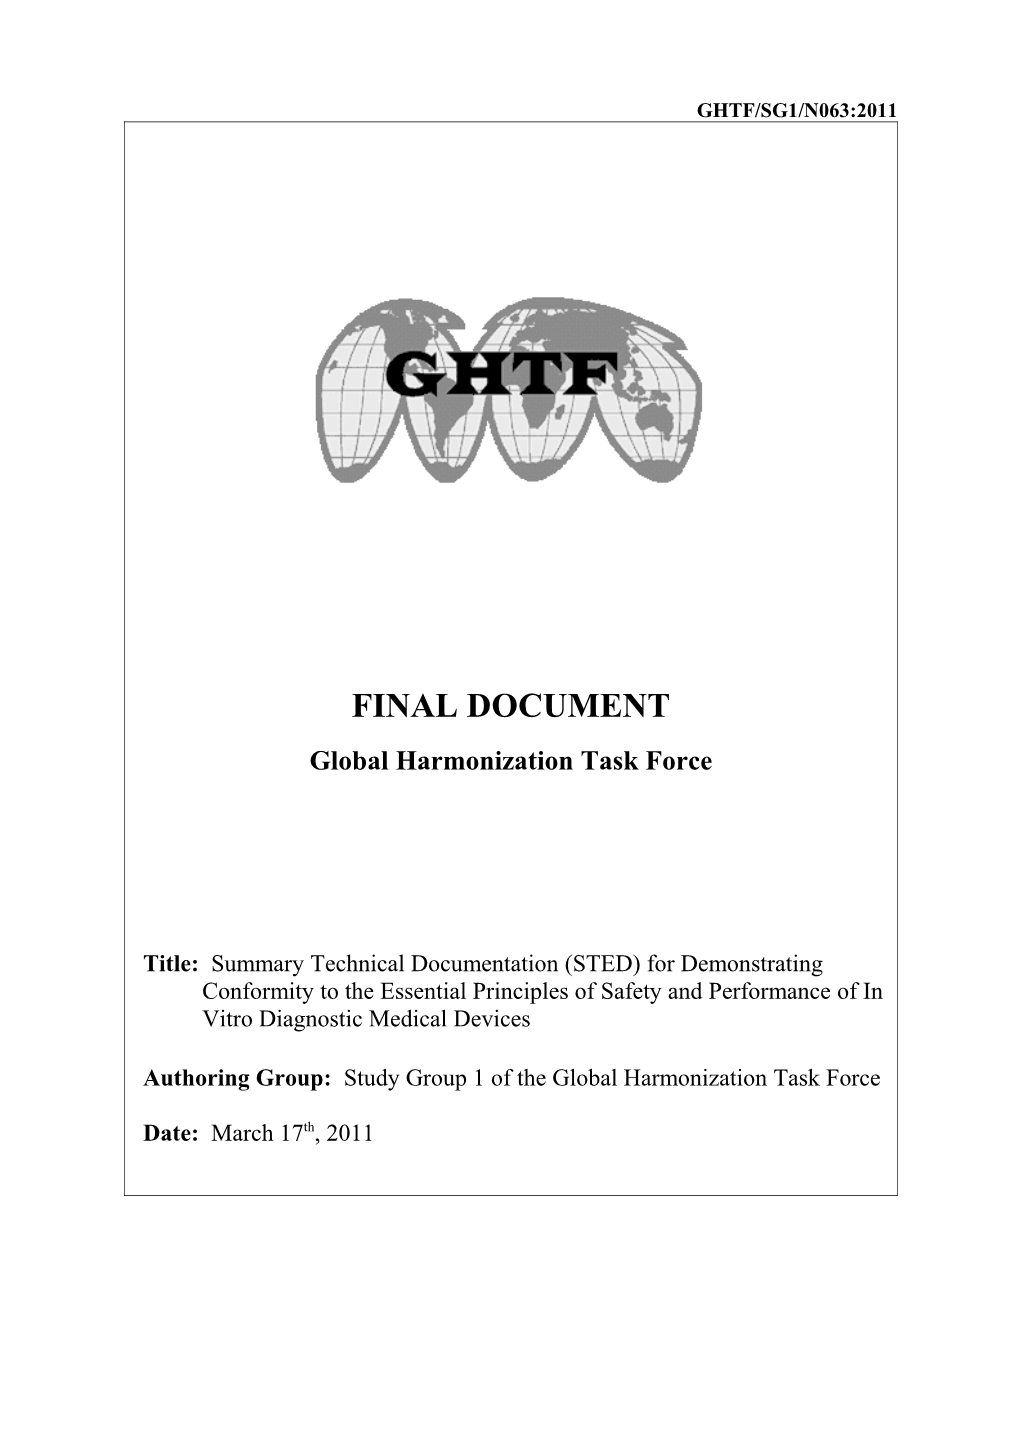 GHTF SG1 - Summary Technical Documentation (STED) for Demonstrating Conformity to the Essential